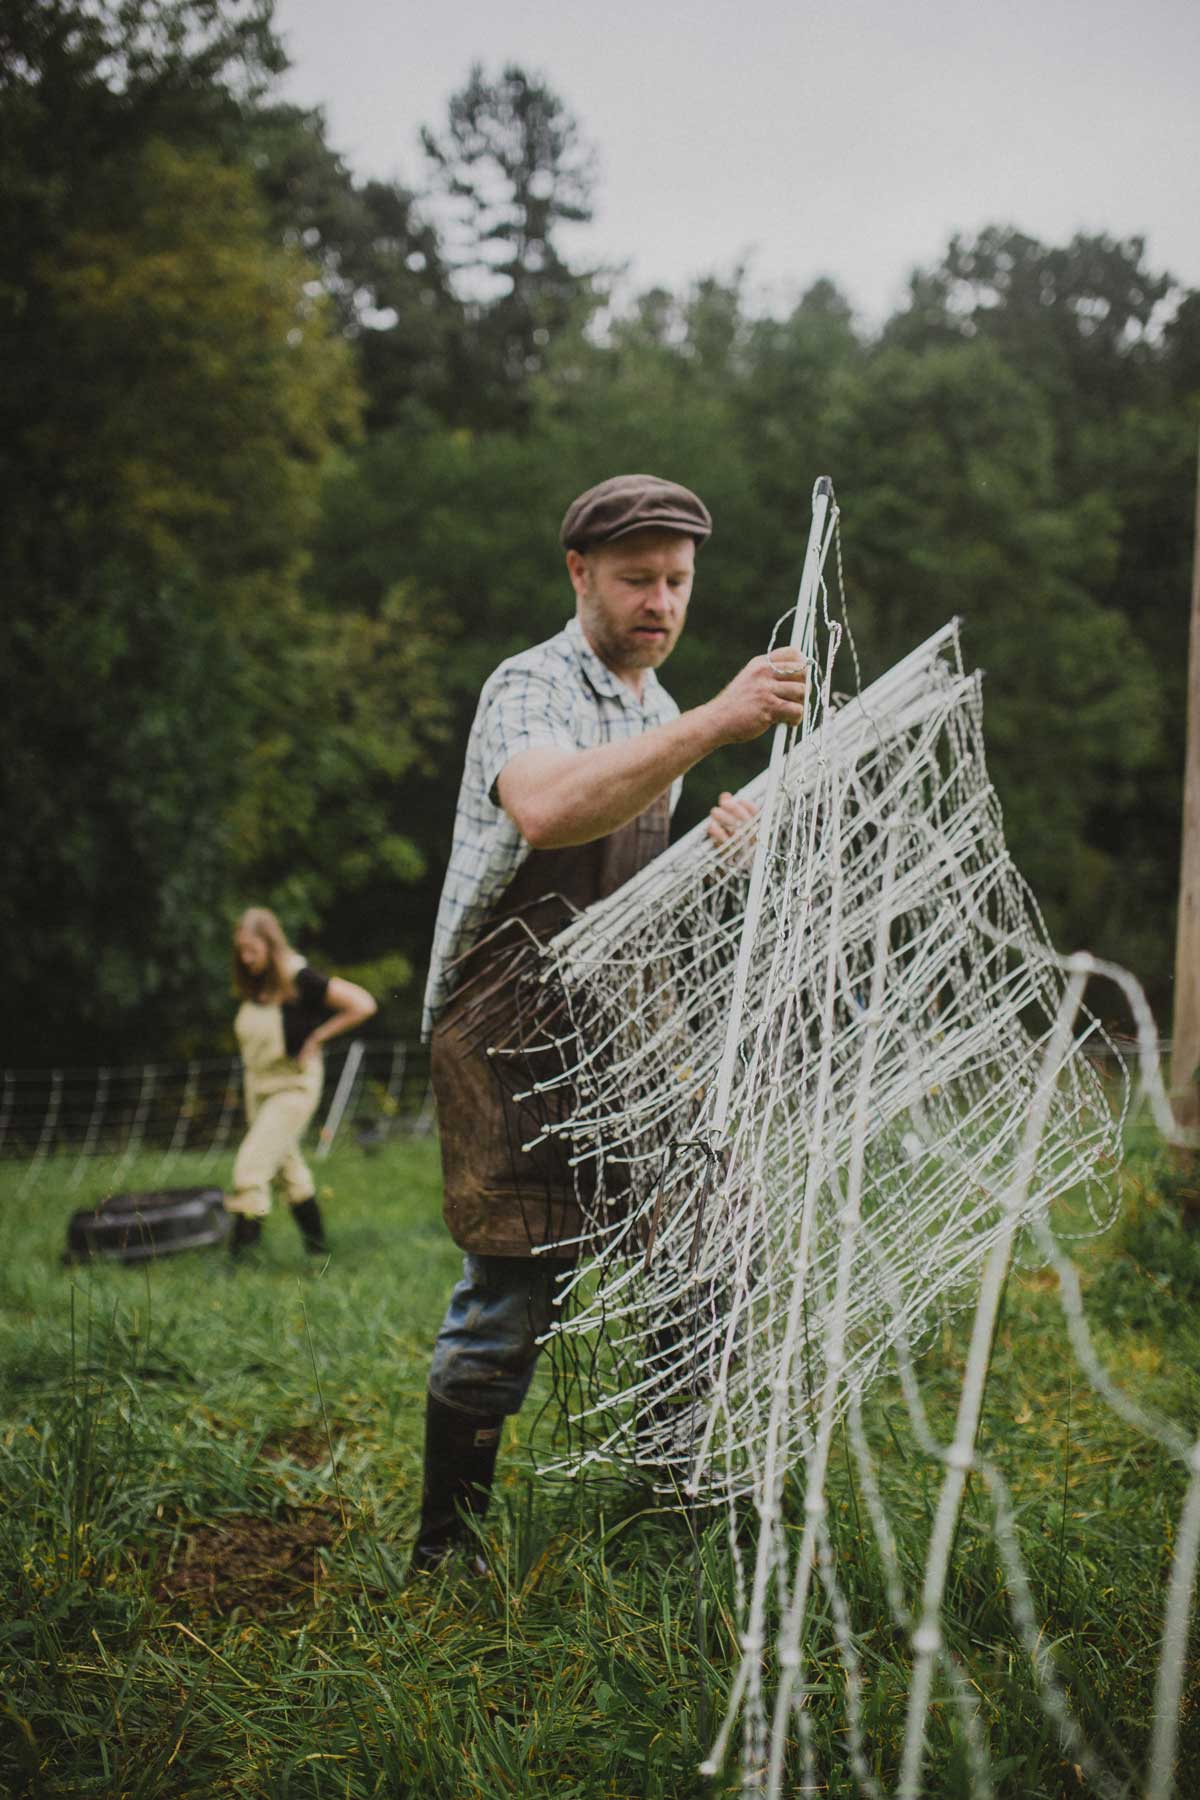 A man moving portable fencing for farm animals.